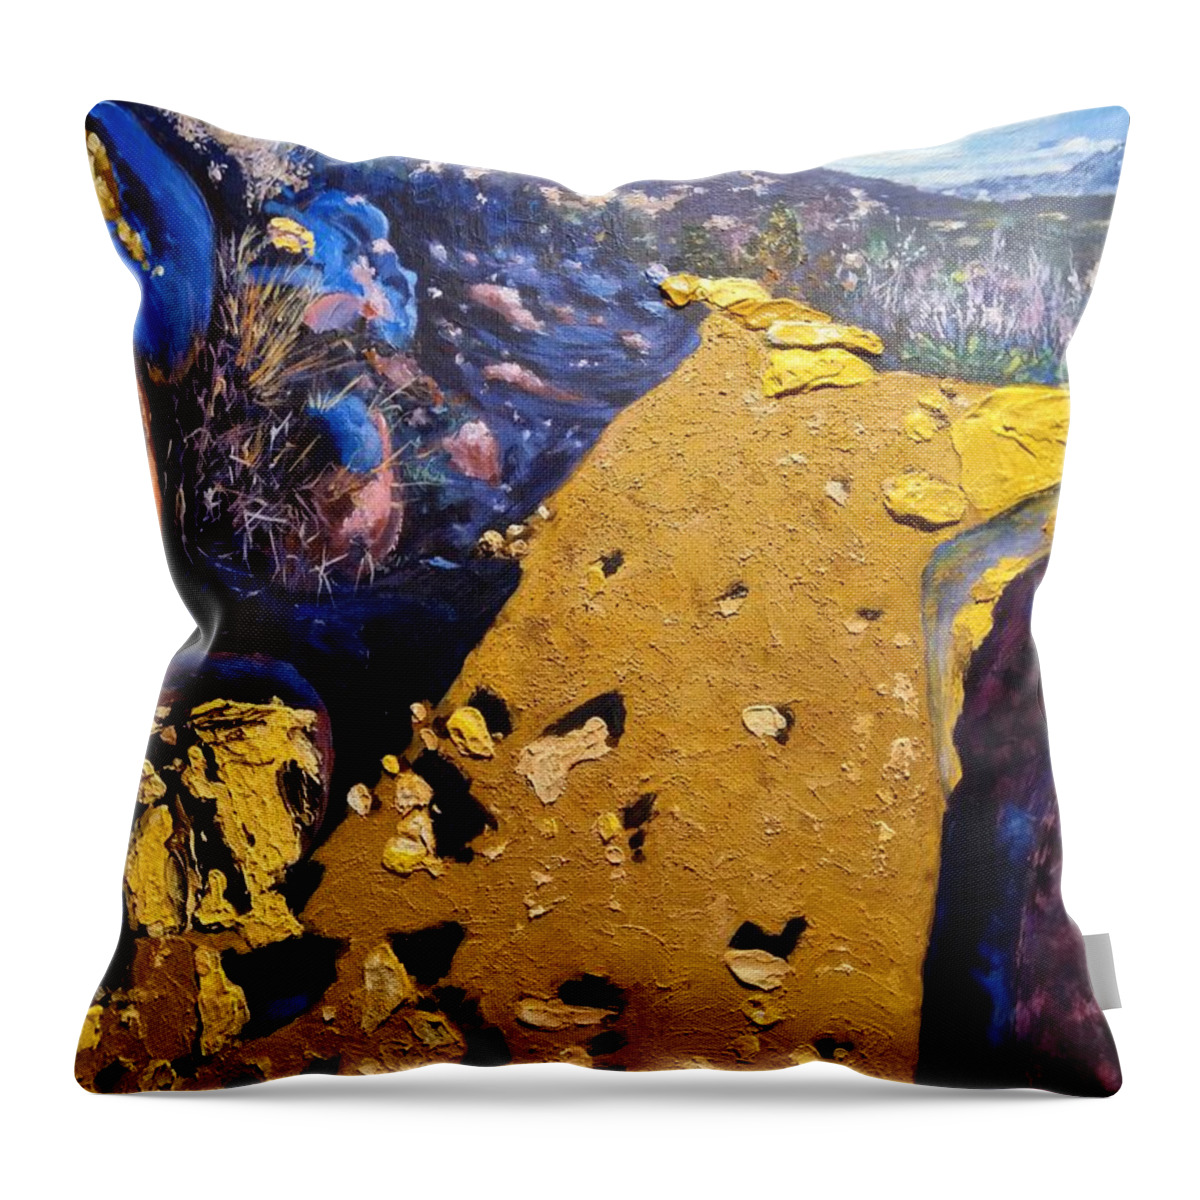 Nature’s Beauty Throw Pillow featuring the painting Cowles Mountain by Ray Khalife